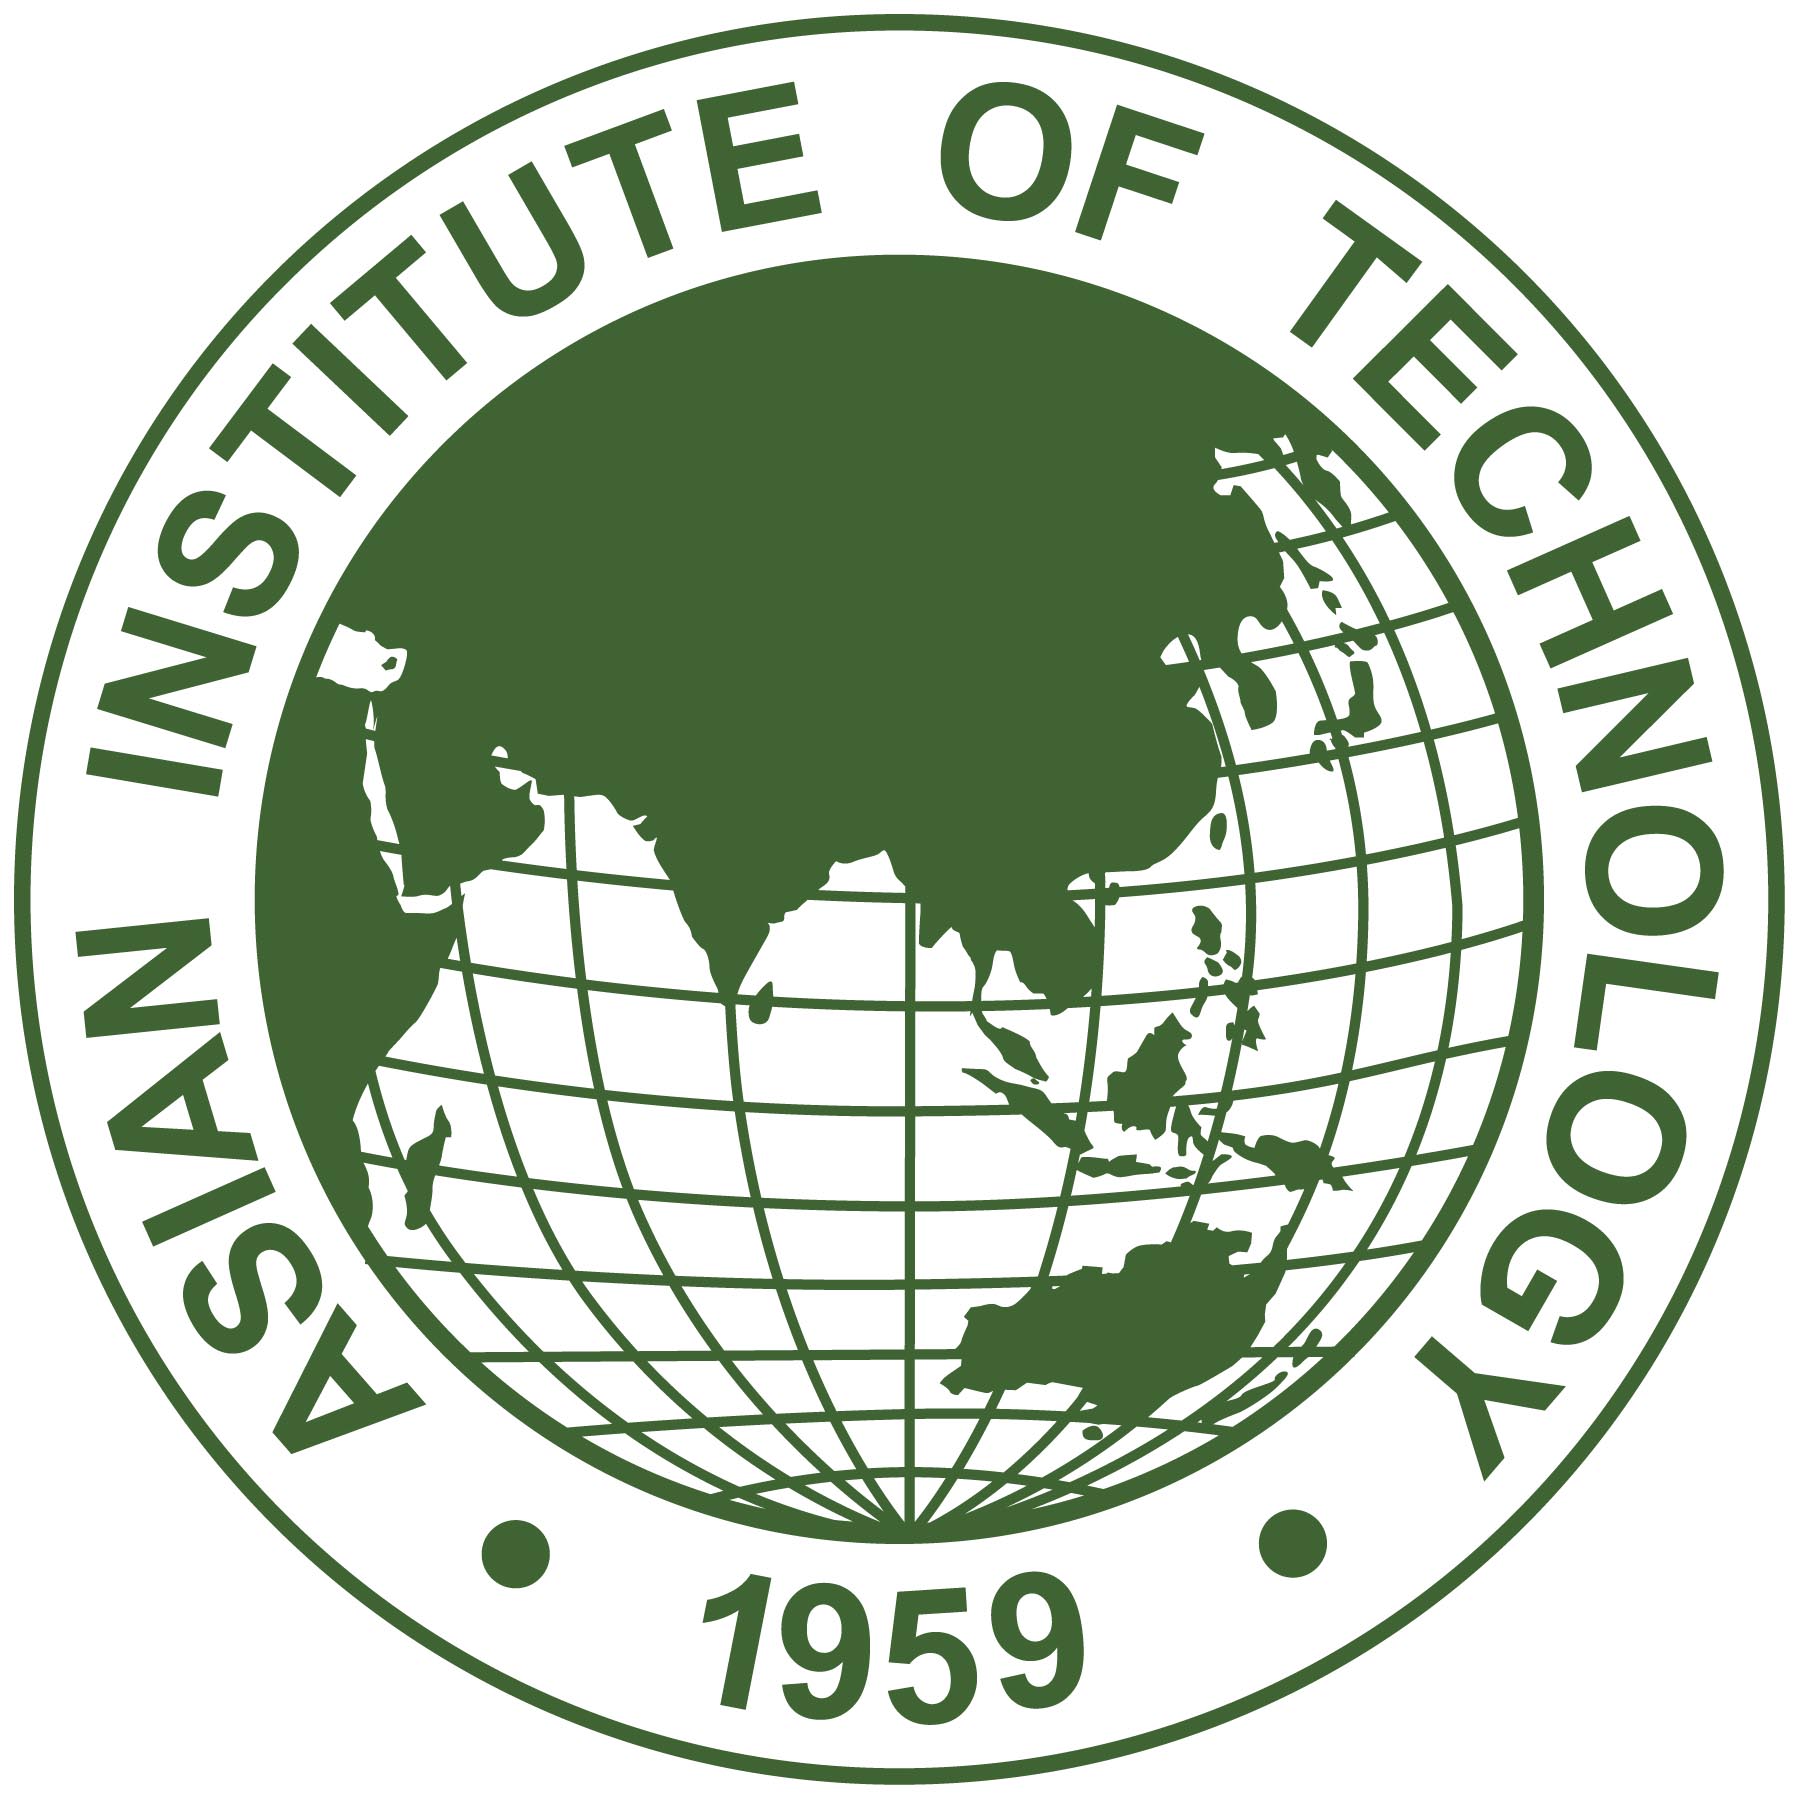 The Asian Institute of Technology (AIT)